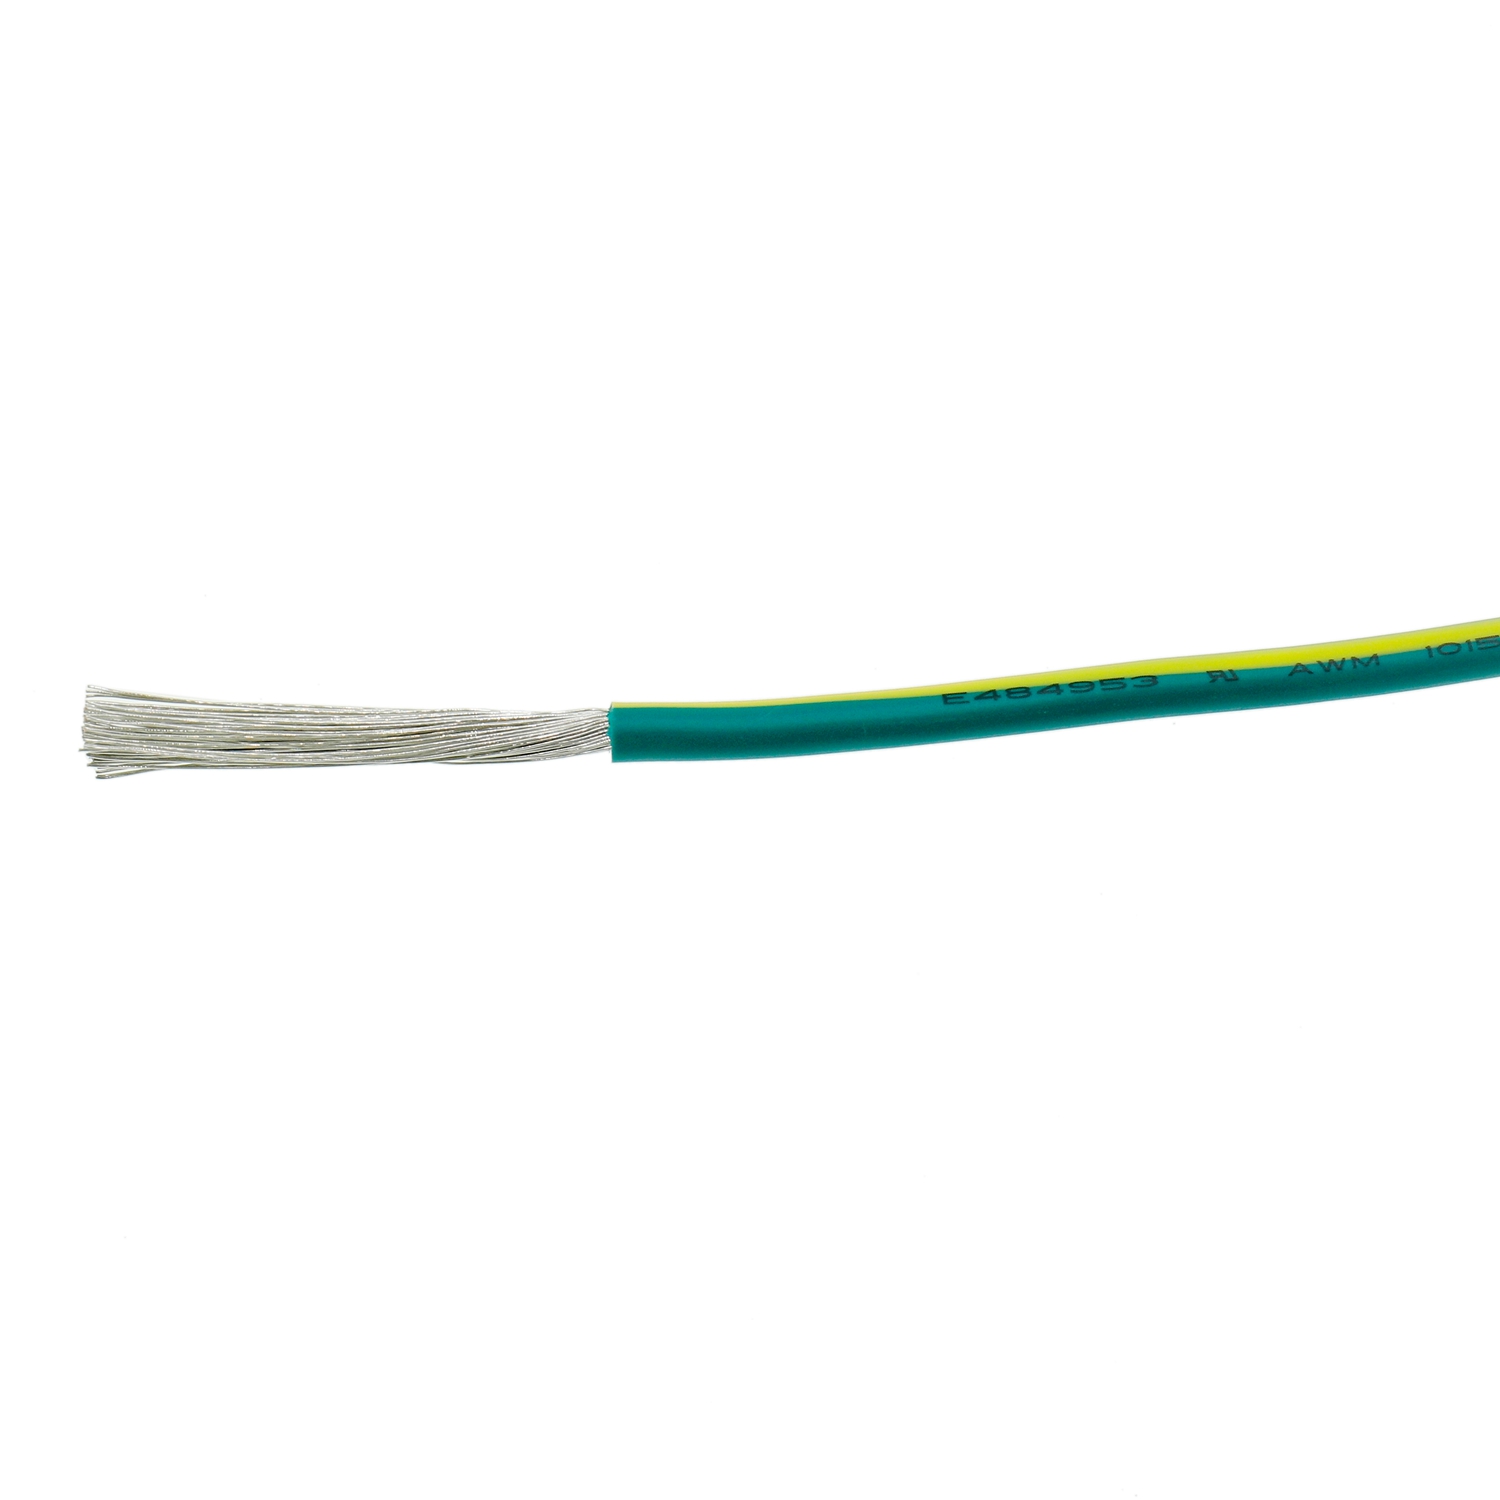 UL1015 8AWG Electrical Power Cable Dilaw na berde Mababang Boltahe